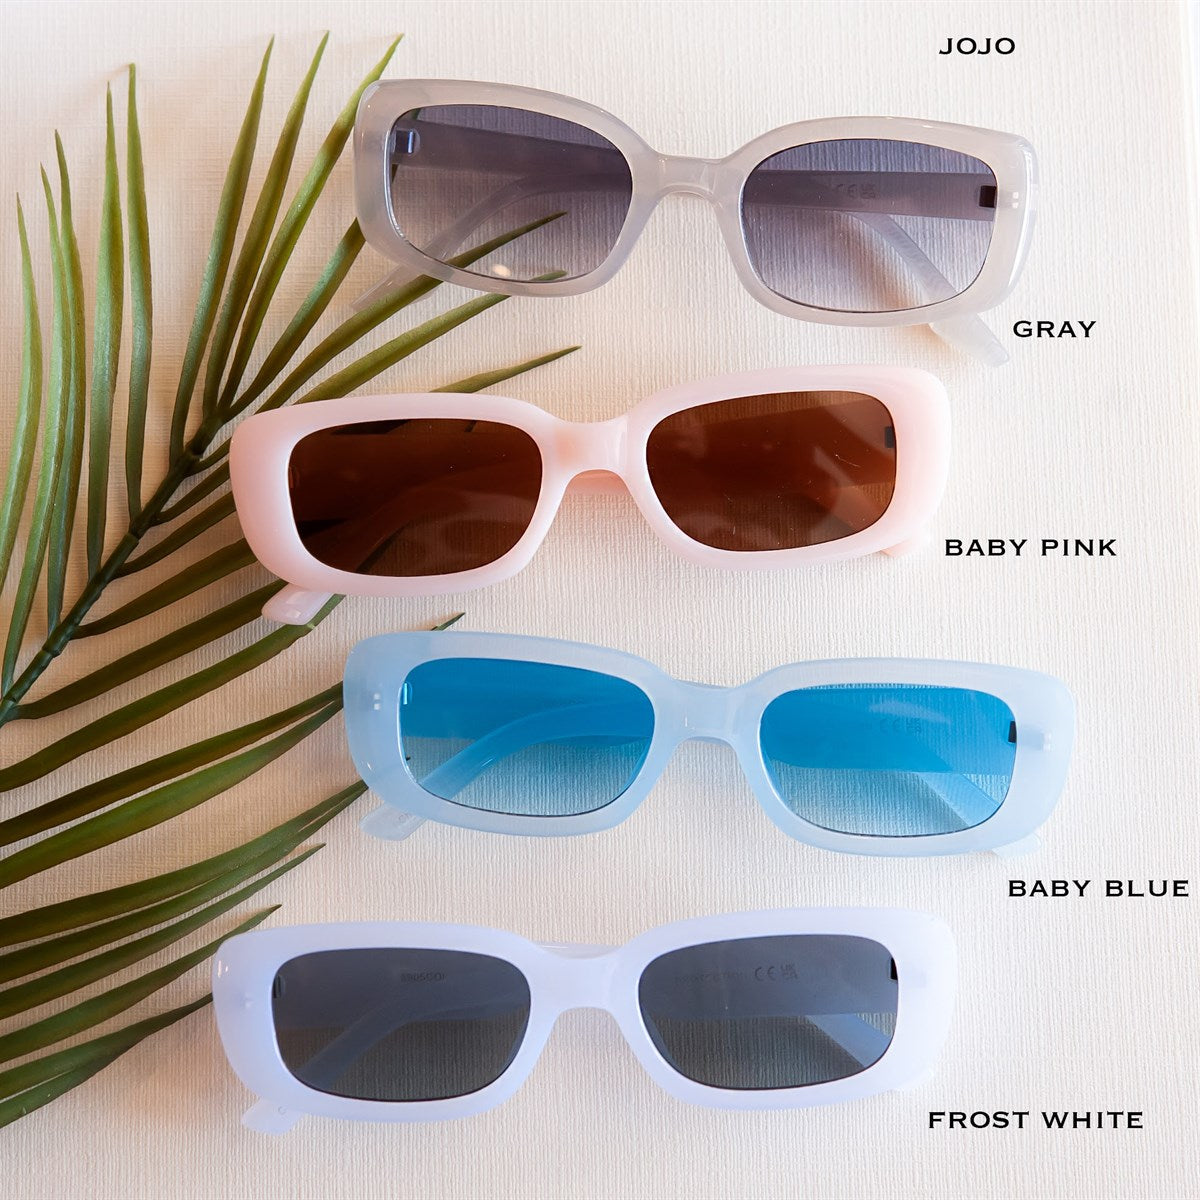 Load image into Gallery viewer, Jojo Small Frame Rectangle Sunglasses | Vacay Vibes Sunnies | Colorful Acetate sunglasses
